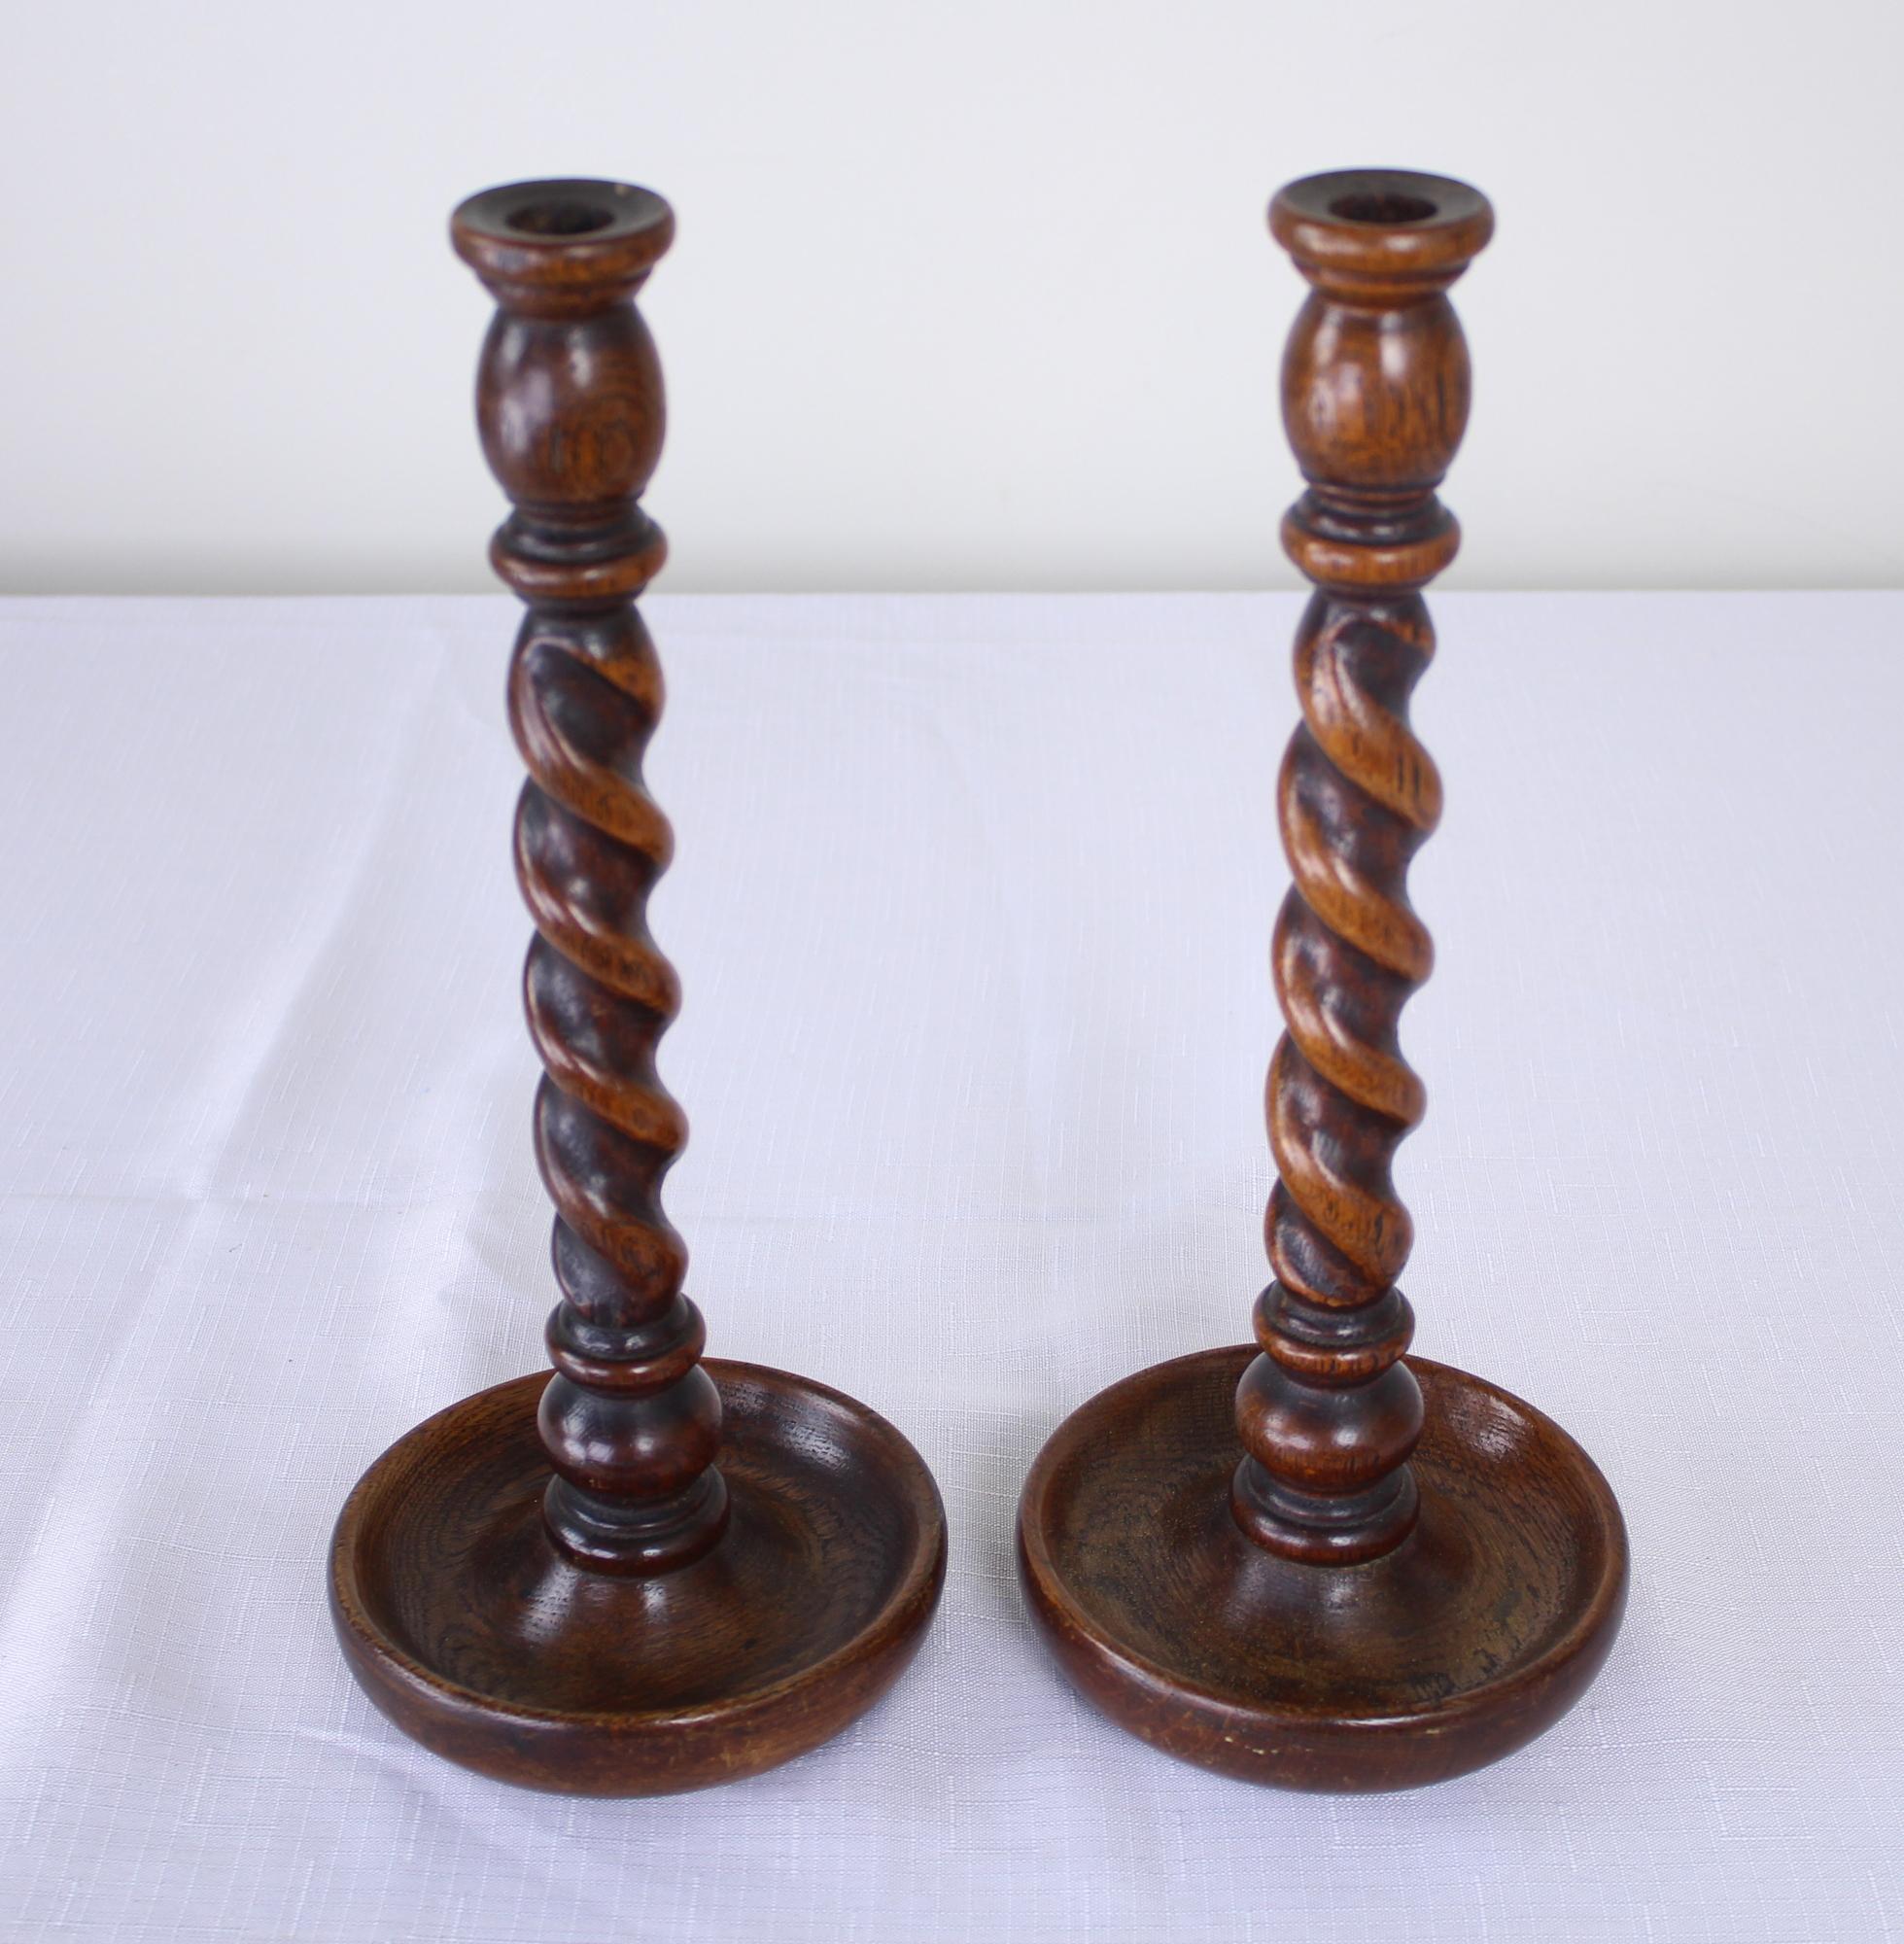 A small collection of oak candlesticks, England, circa 1900. Heights vary from 11-13